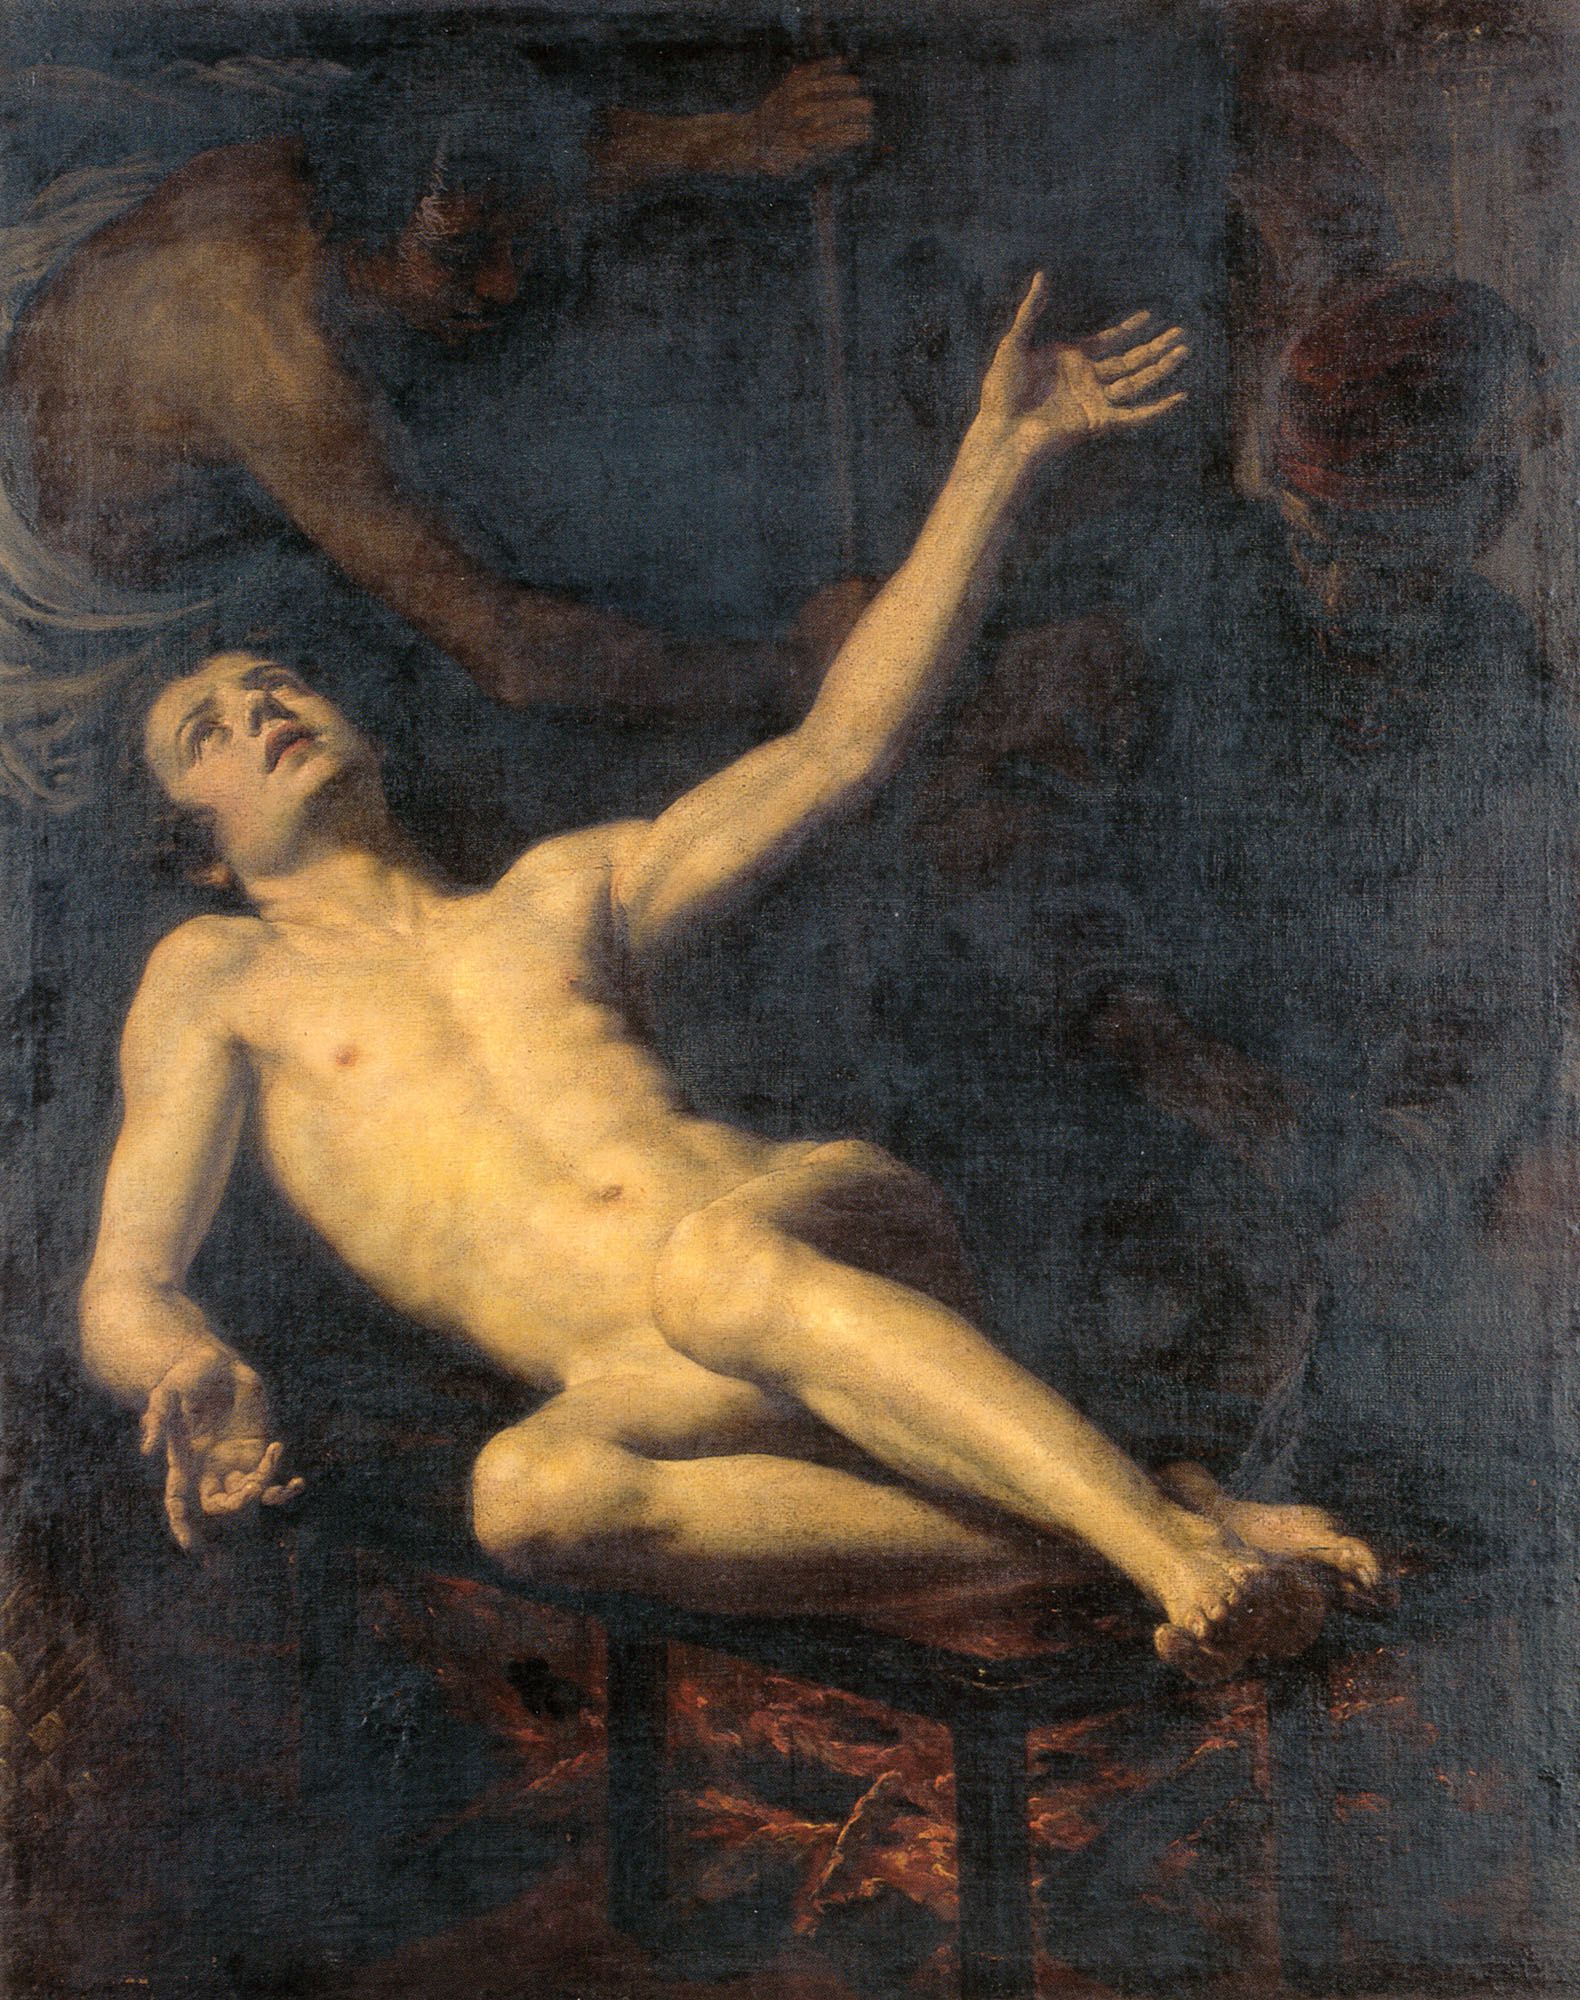 The Martyrdom of Saint Lawrence by Jacopo Vignali